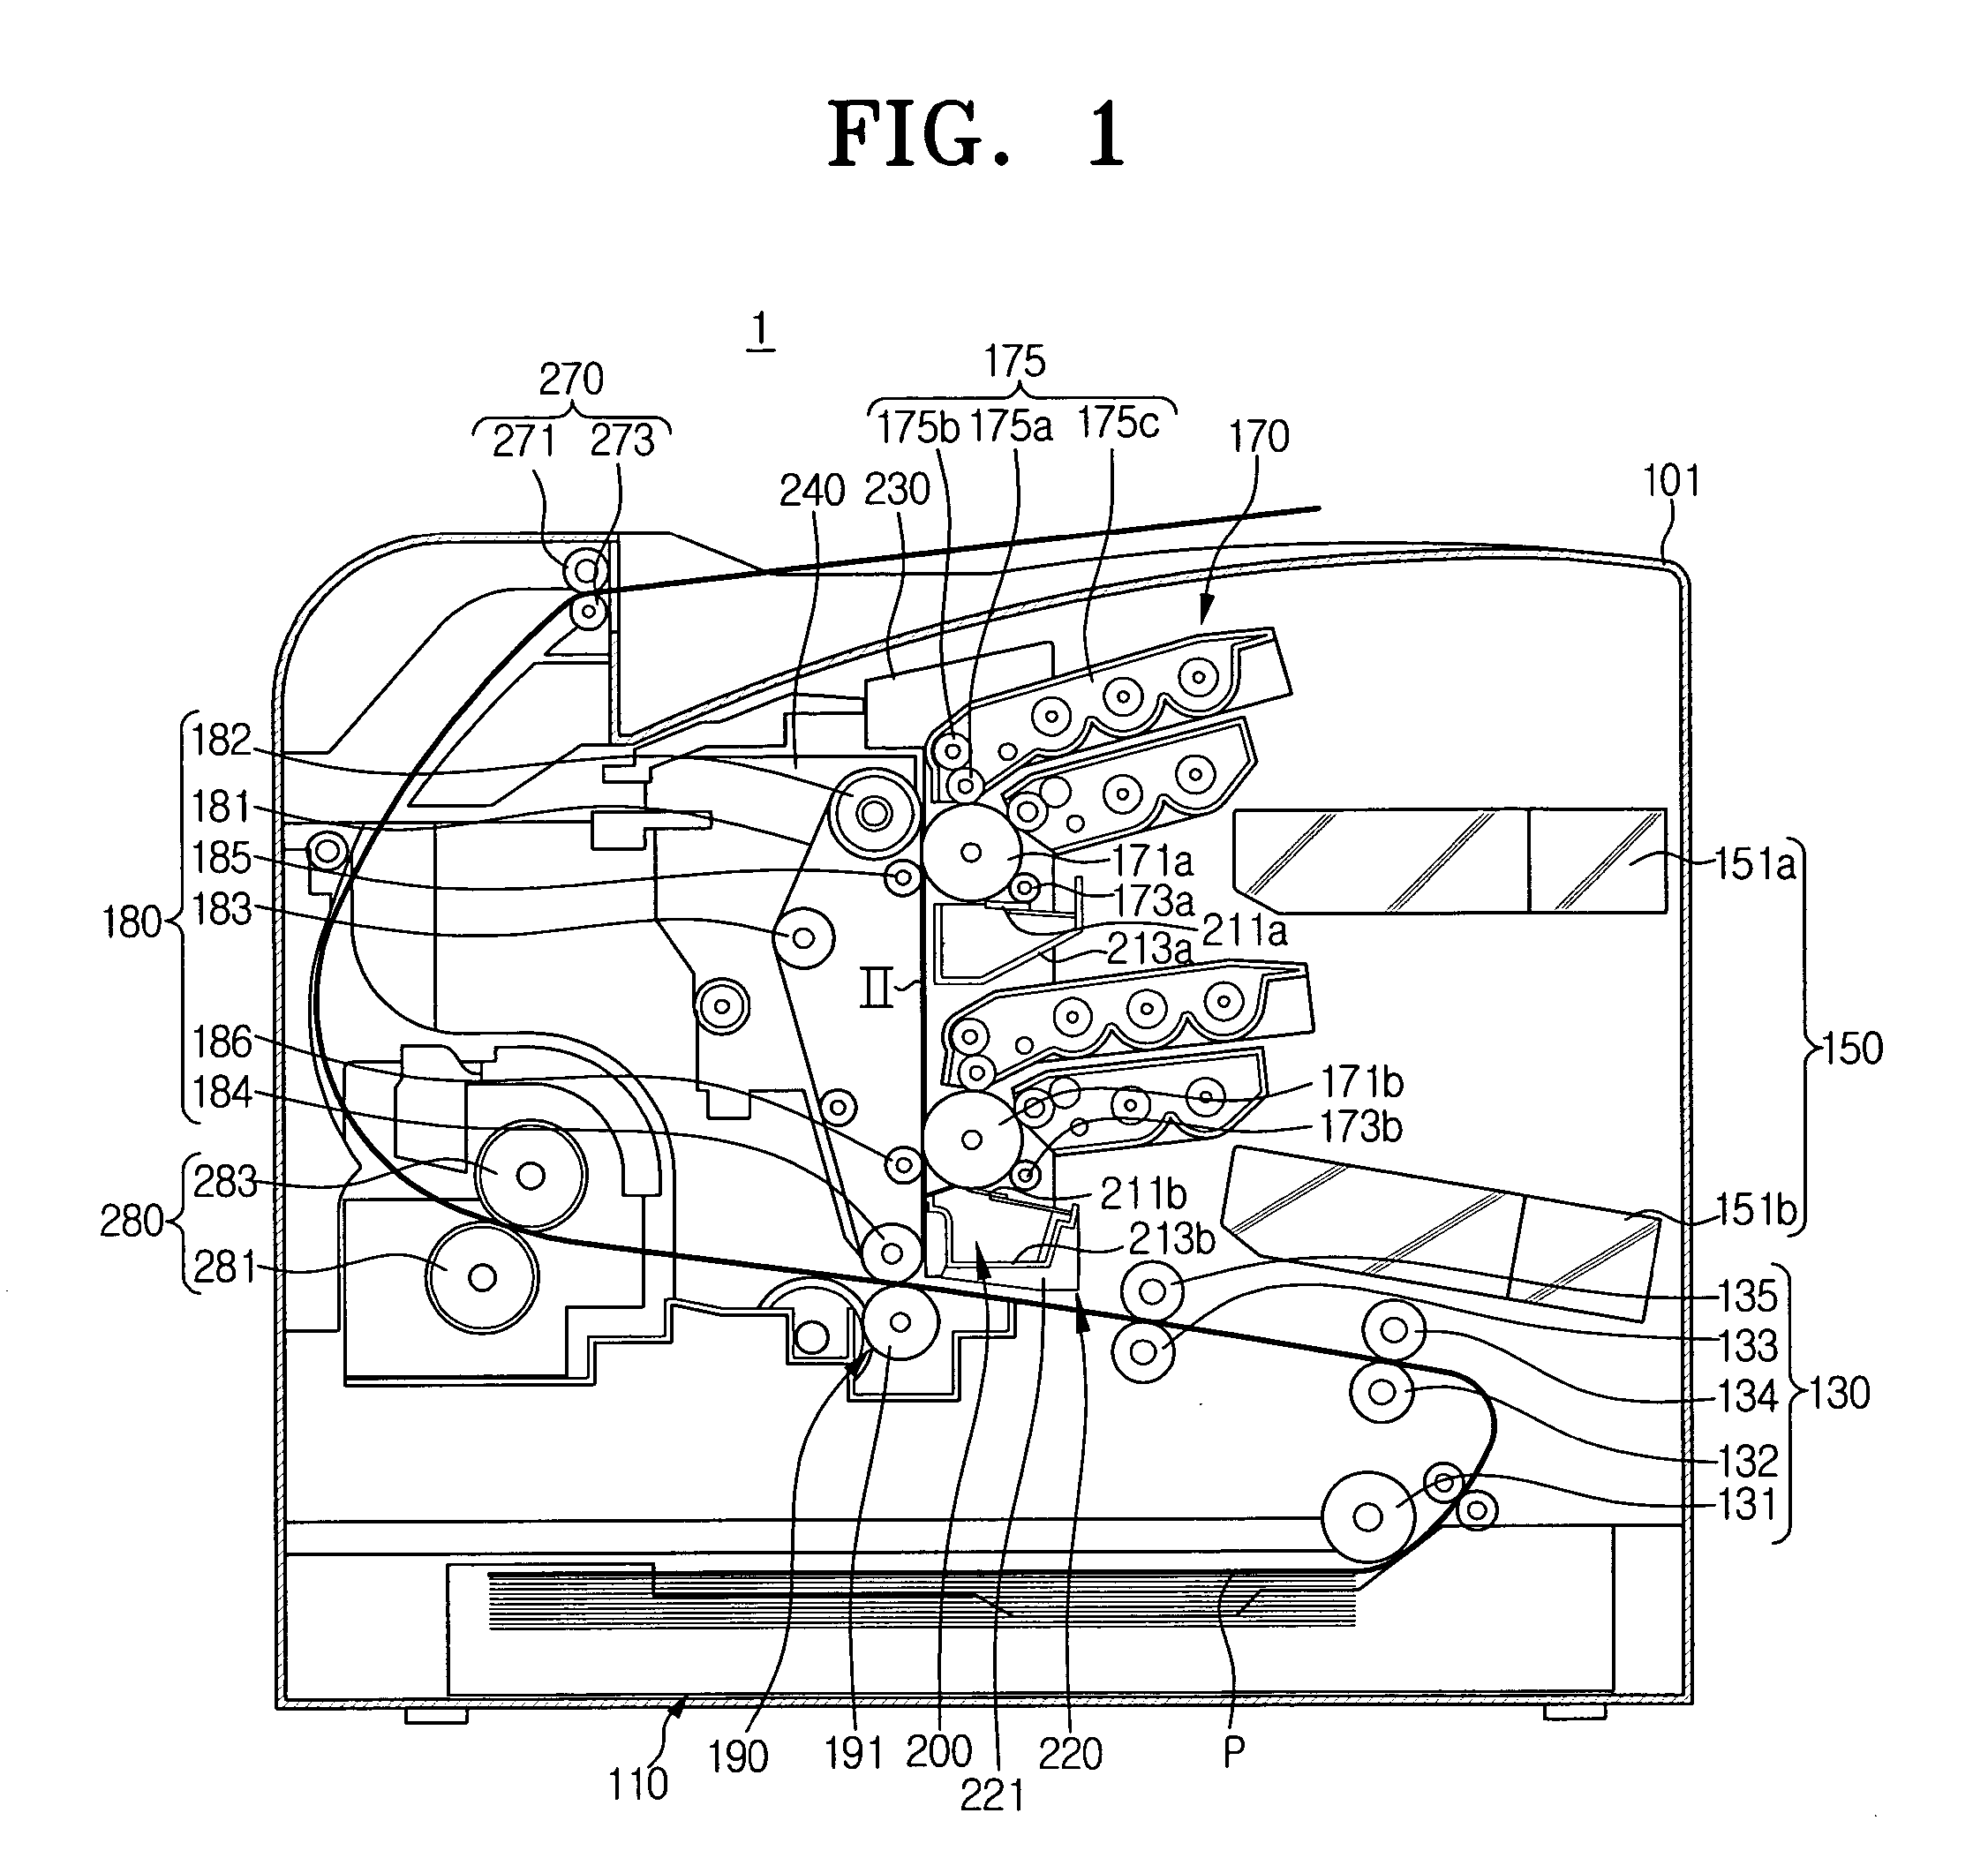 Image forming apparatus with printing medium guide